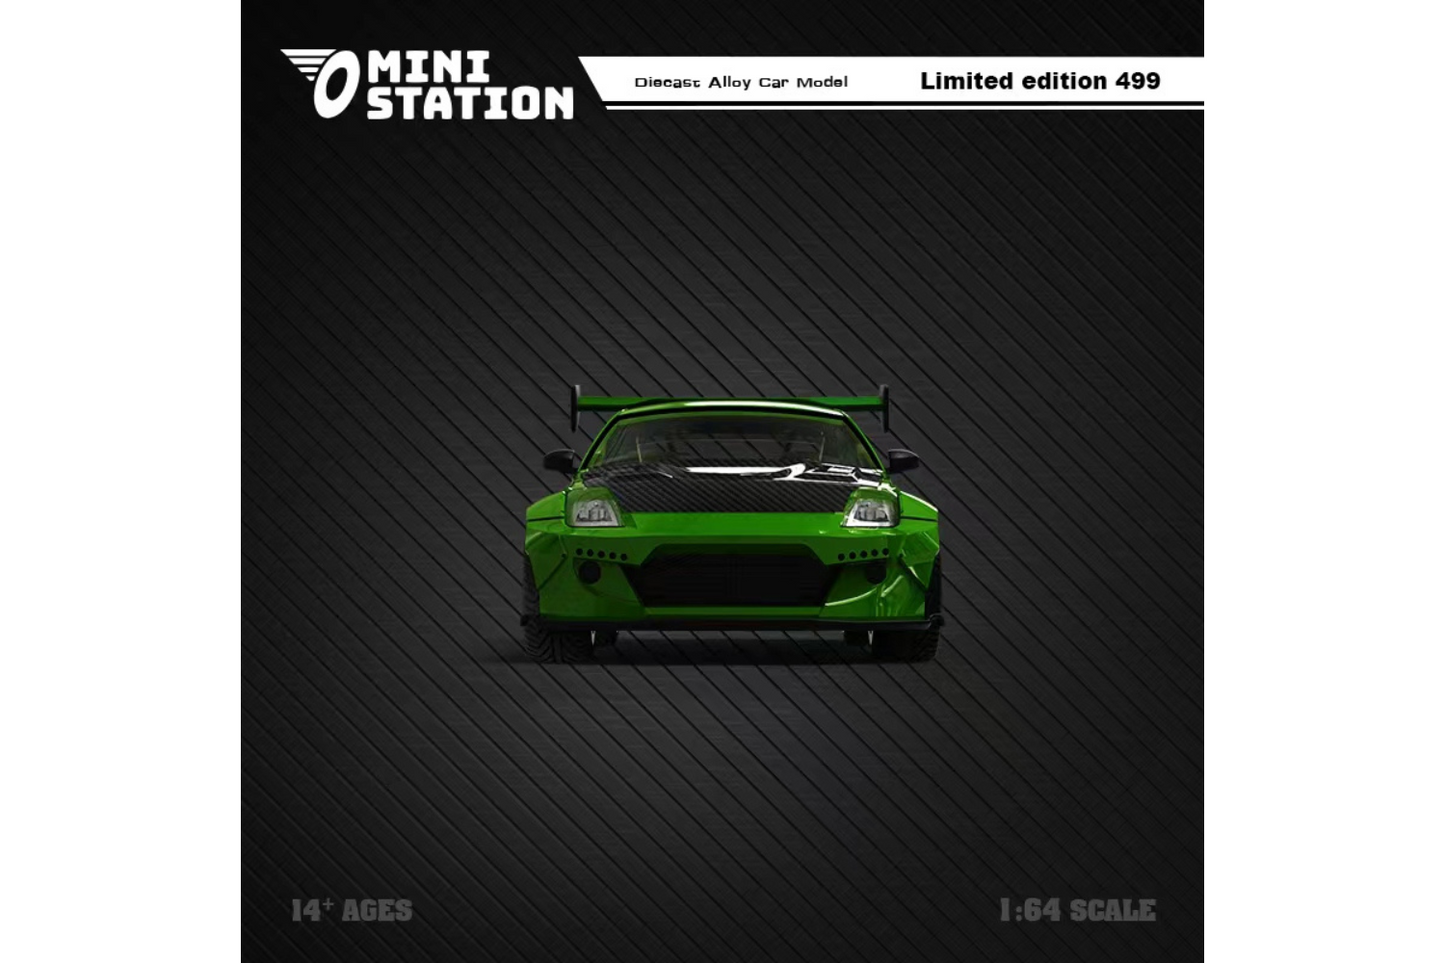 Mini Station 1/64 Nissan 350z in Need For Speed Underground Livery